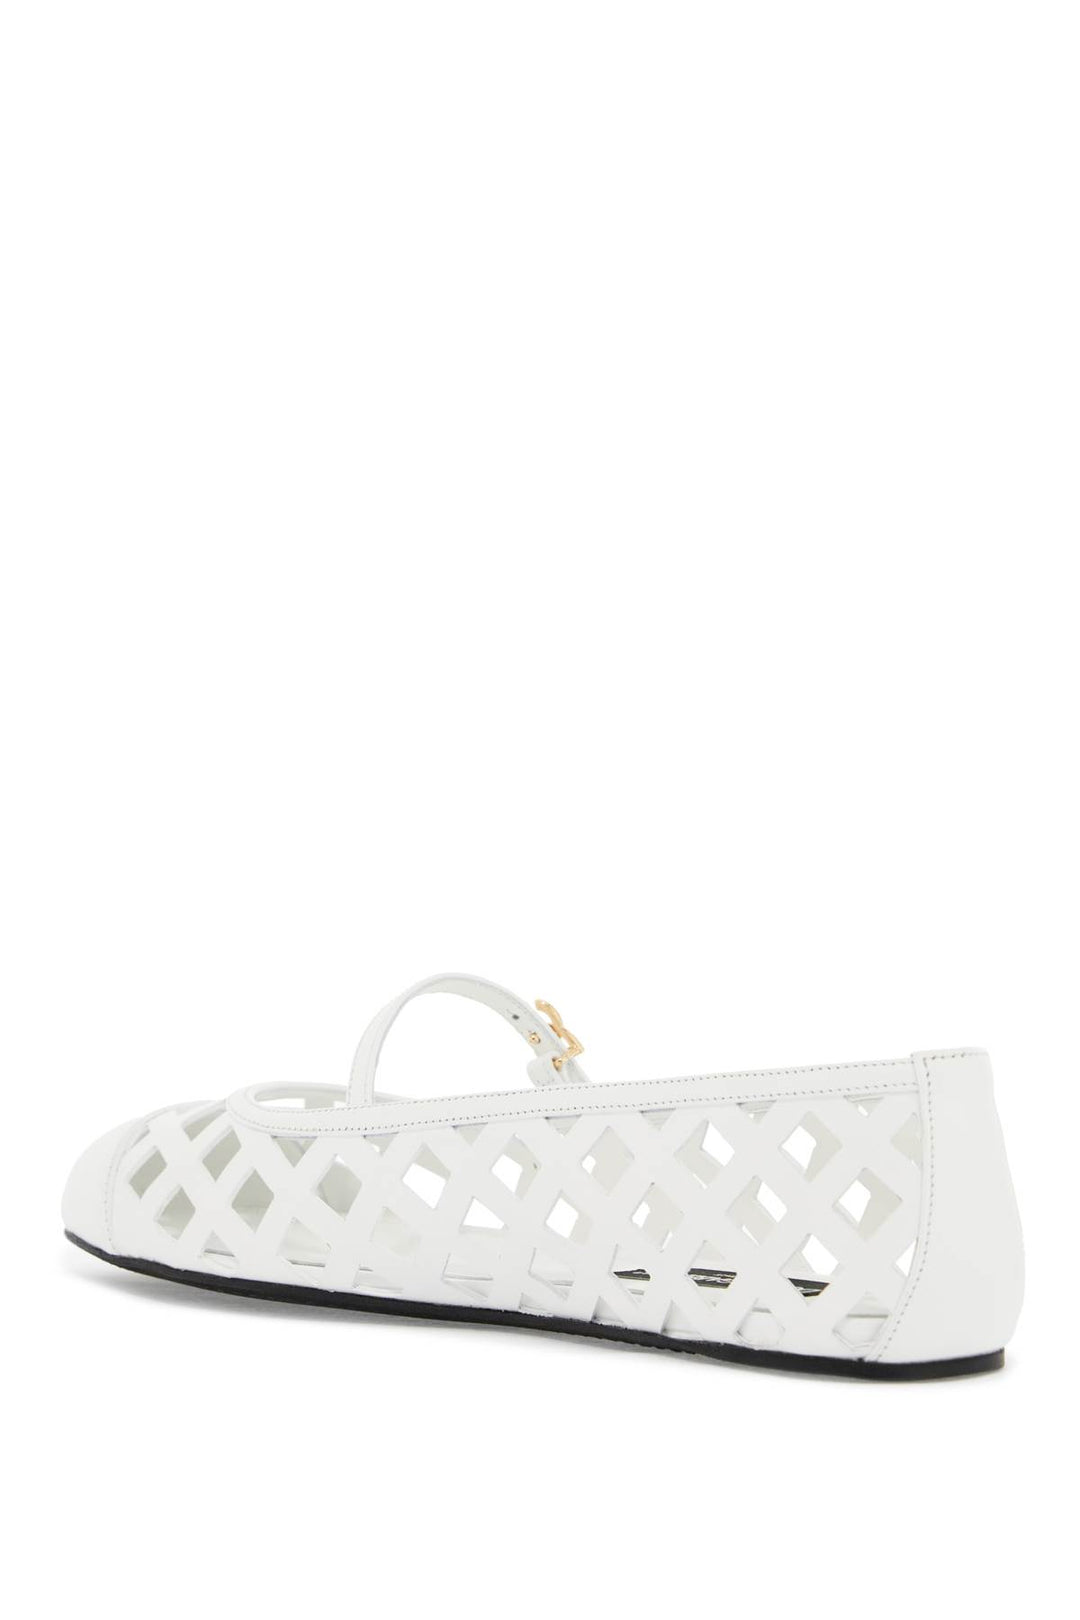 Dolce & Gabbana Perforated Leather Odette   White